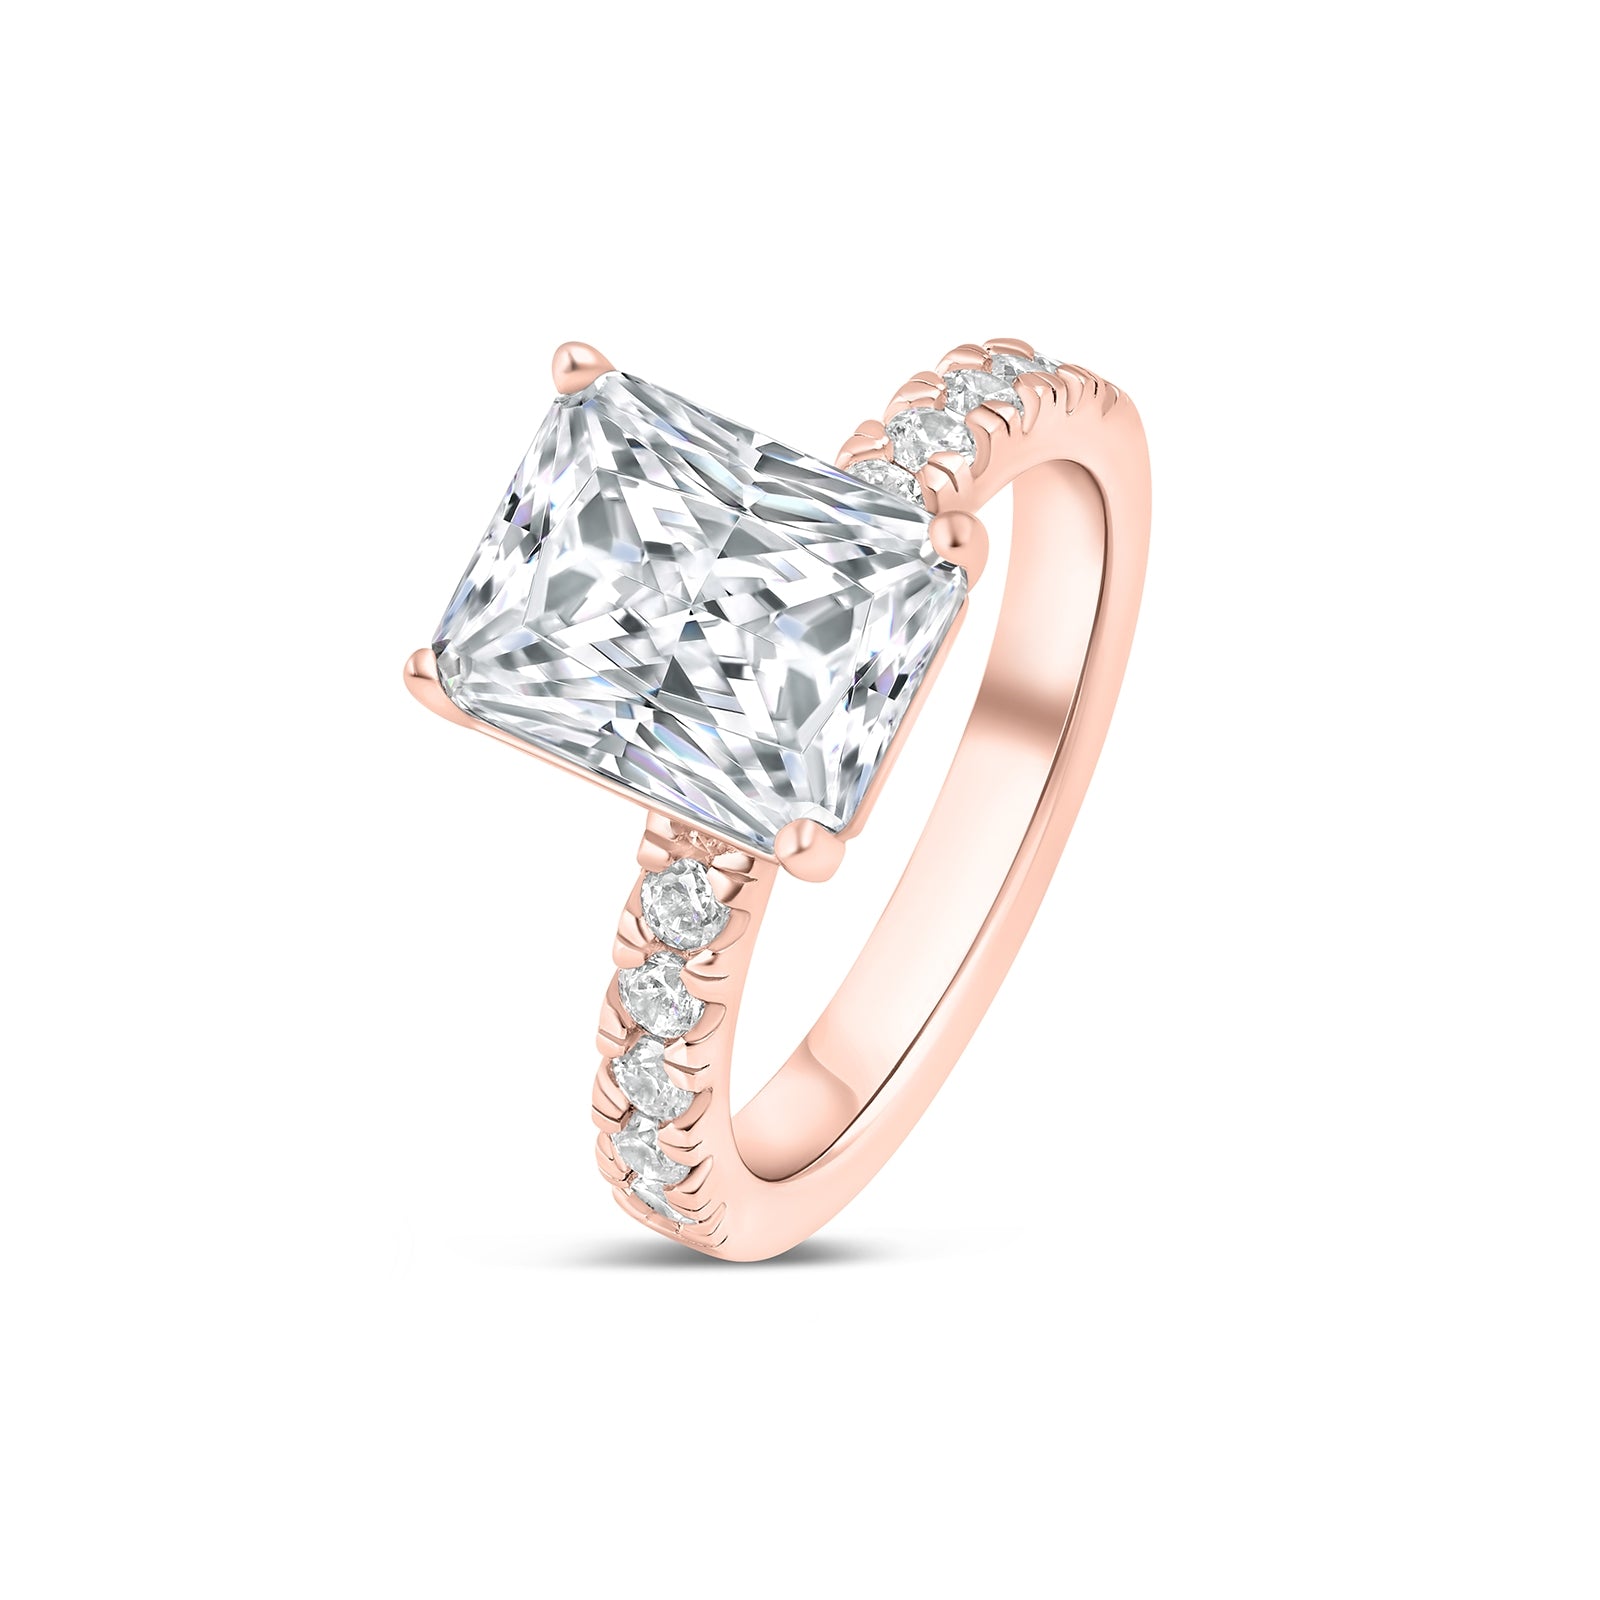 Classic 3.75 carat rose gold radiant cut engagement ring with half eternity band detailing tilted to its side